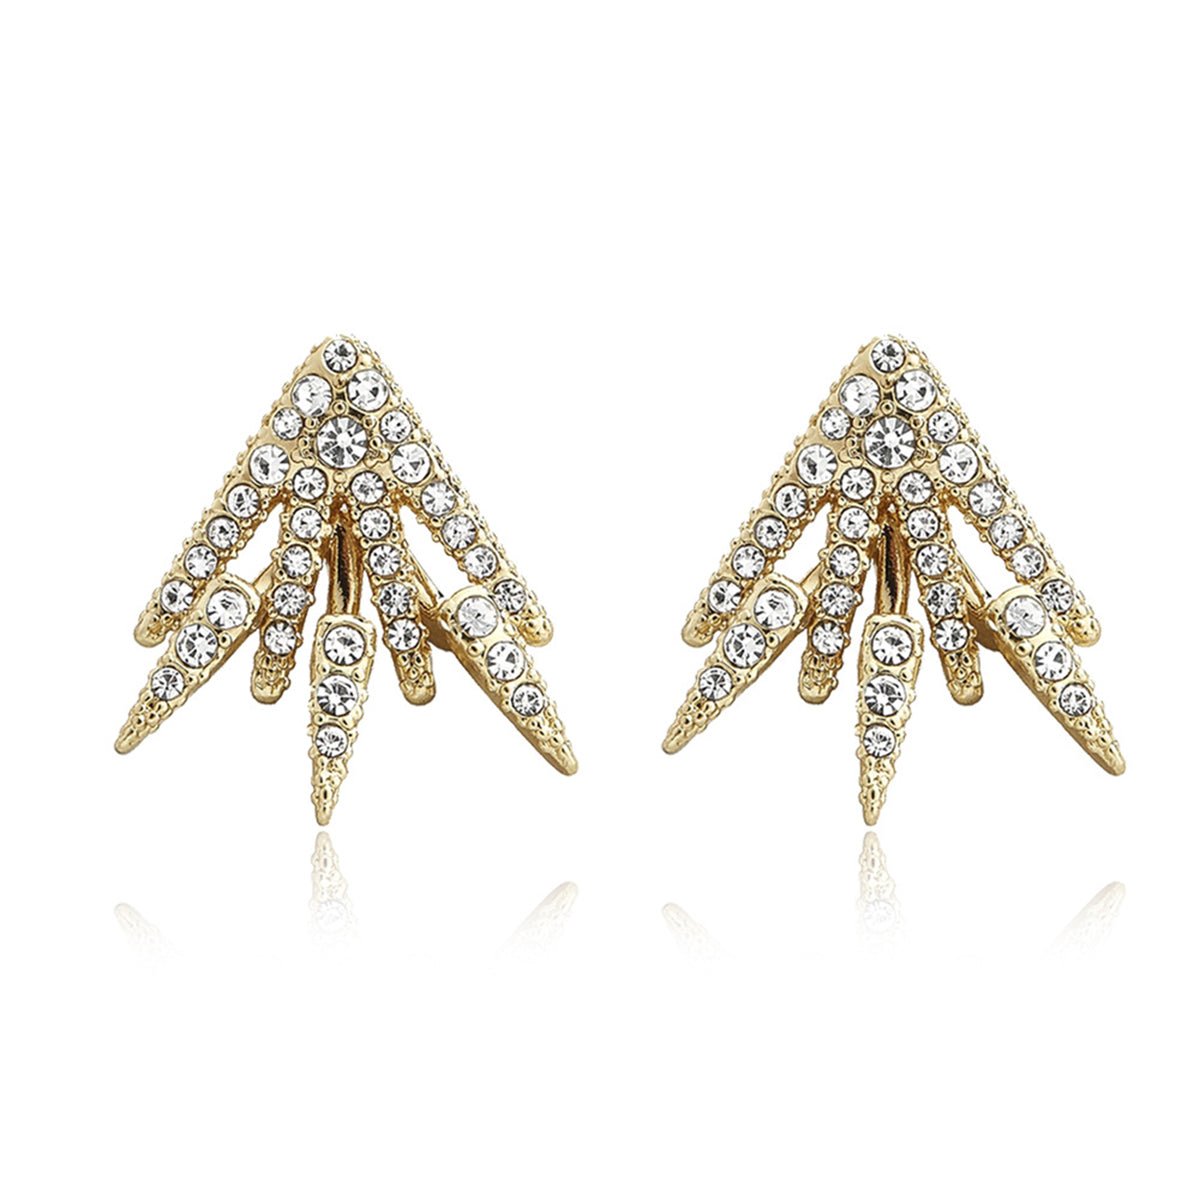 18K-Gold-Centauri-Ear-Jackets-With-Crystals-From-Swarovski-Earrings